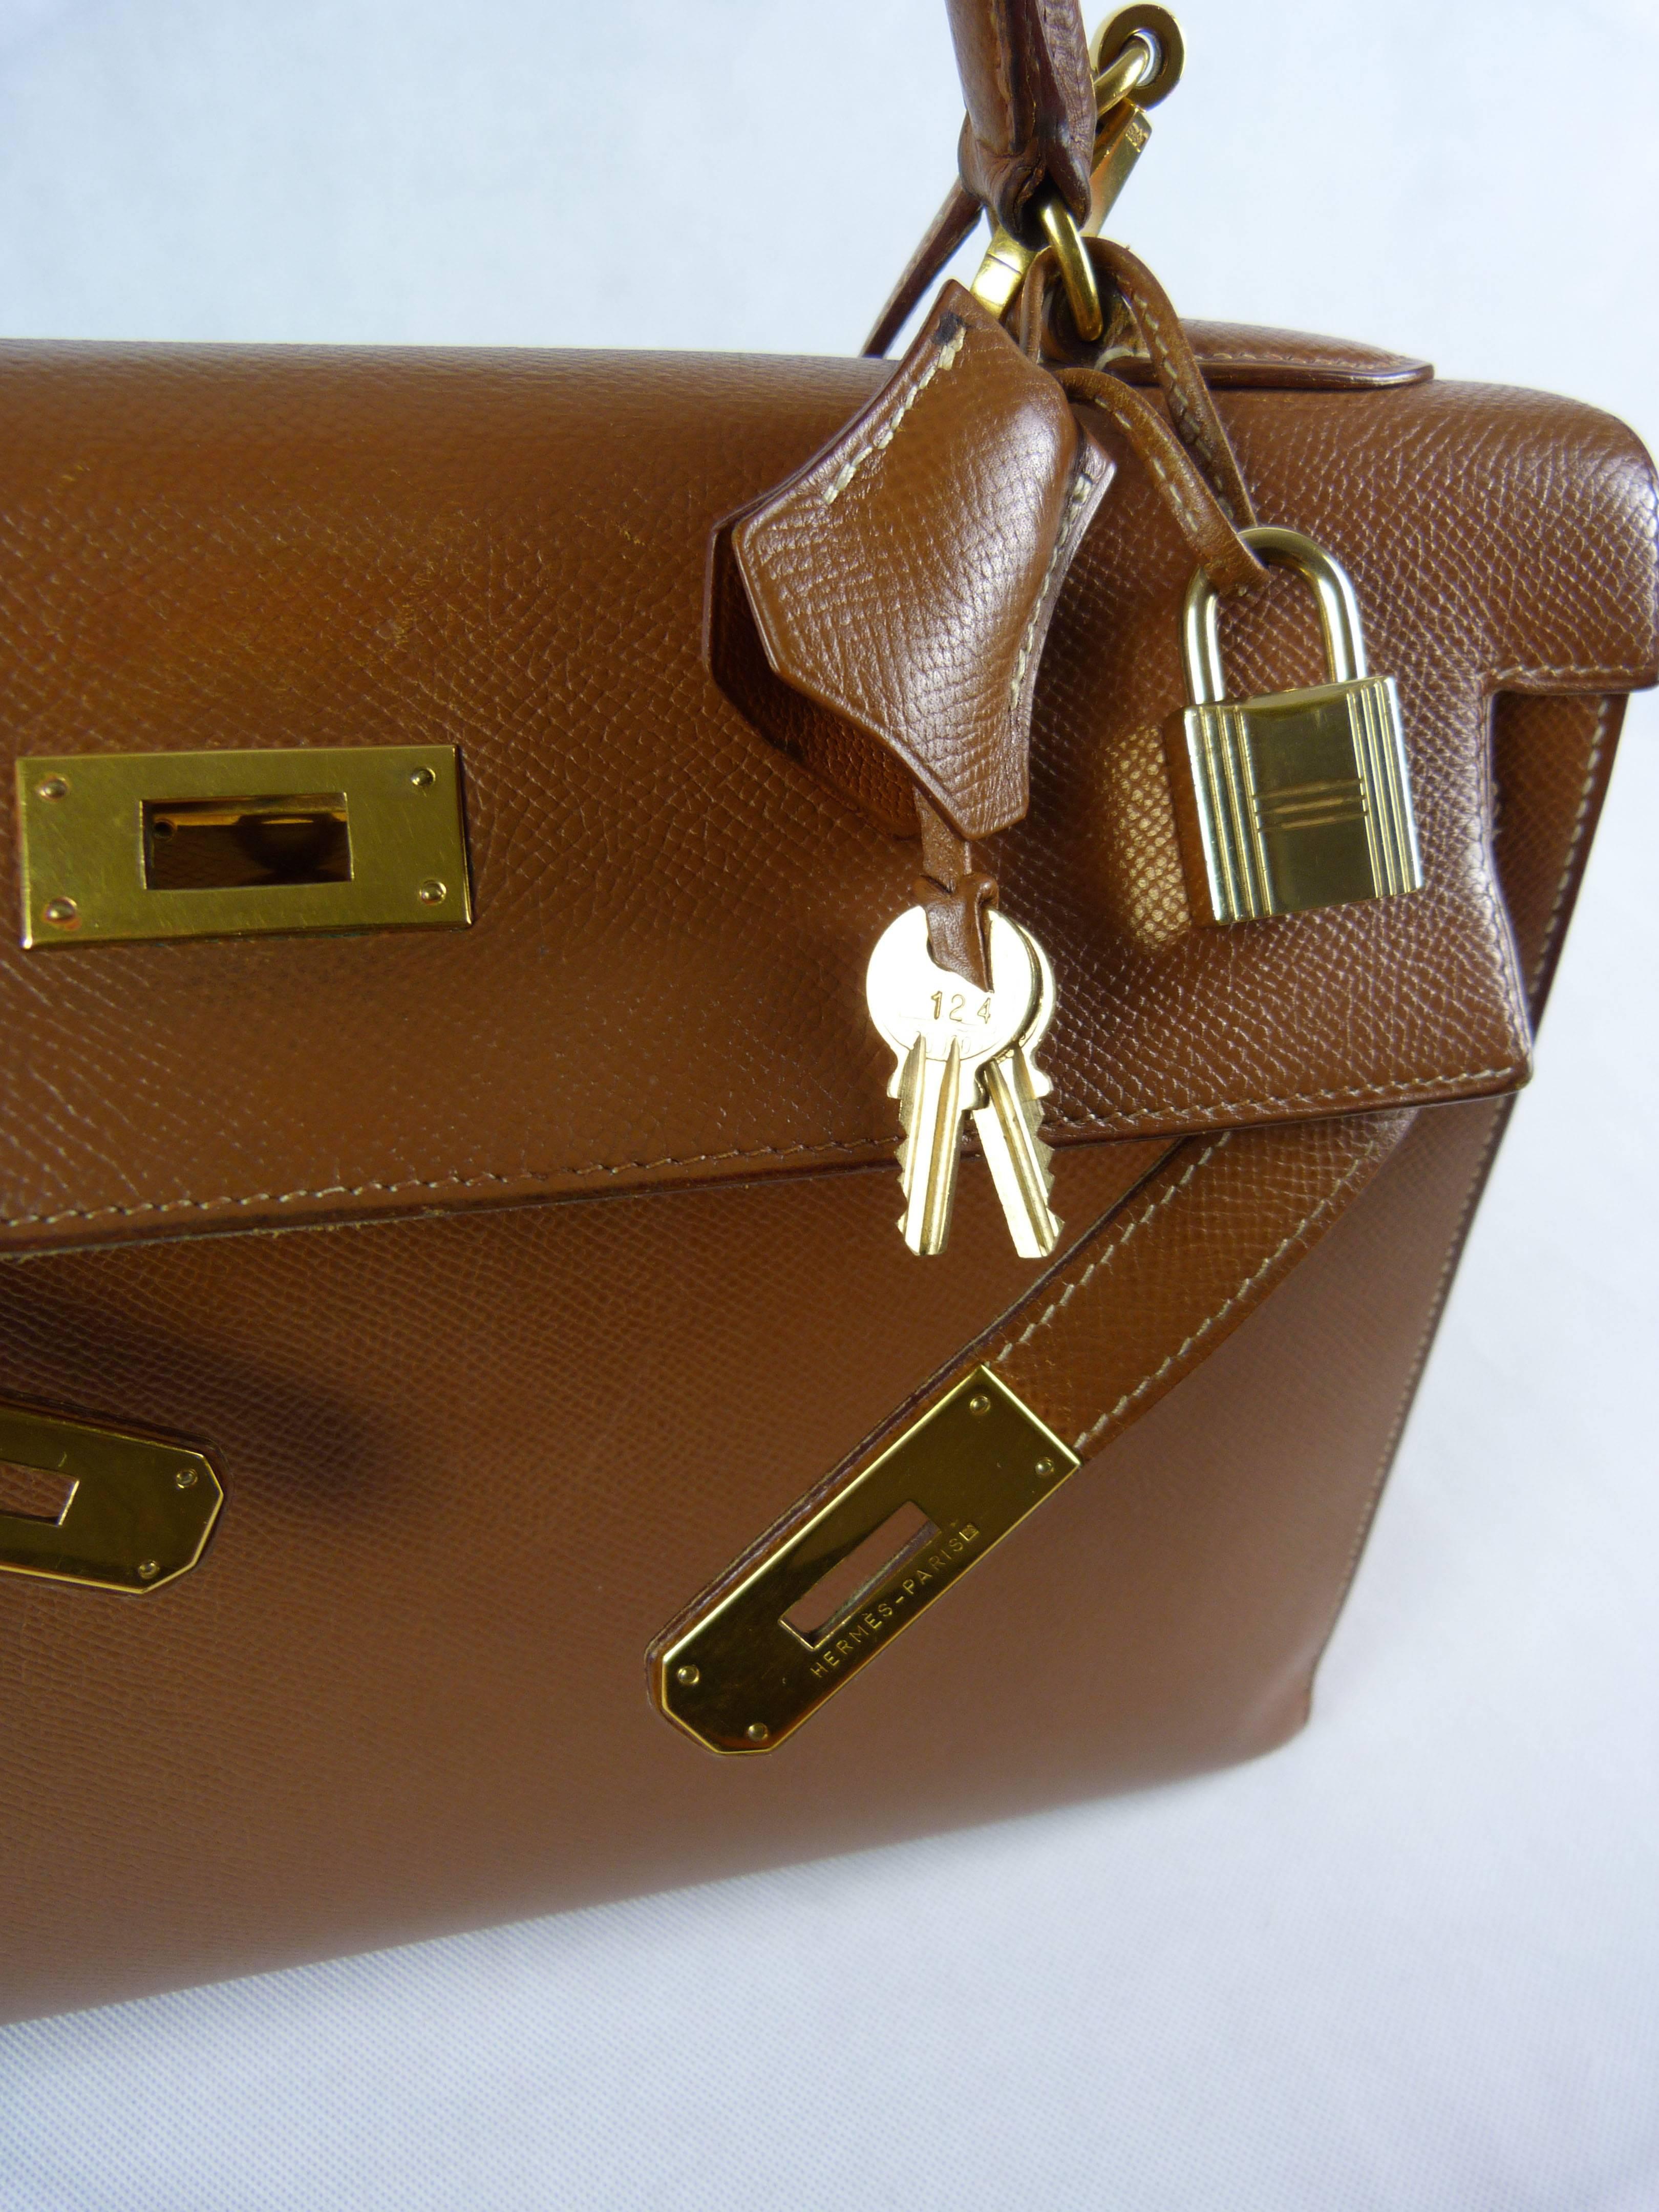 Hermès Gold Epsom Kelly 32Cm Bag In Good Condition For Sale In Castries, FR